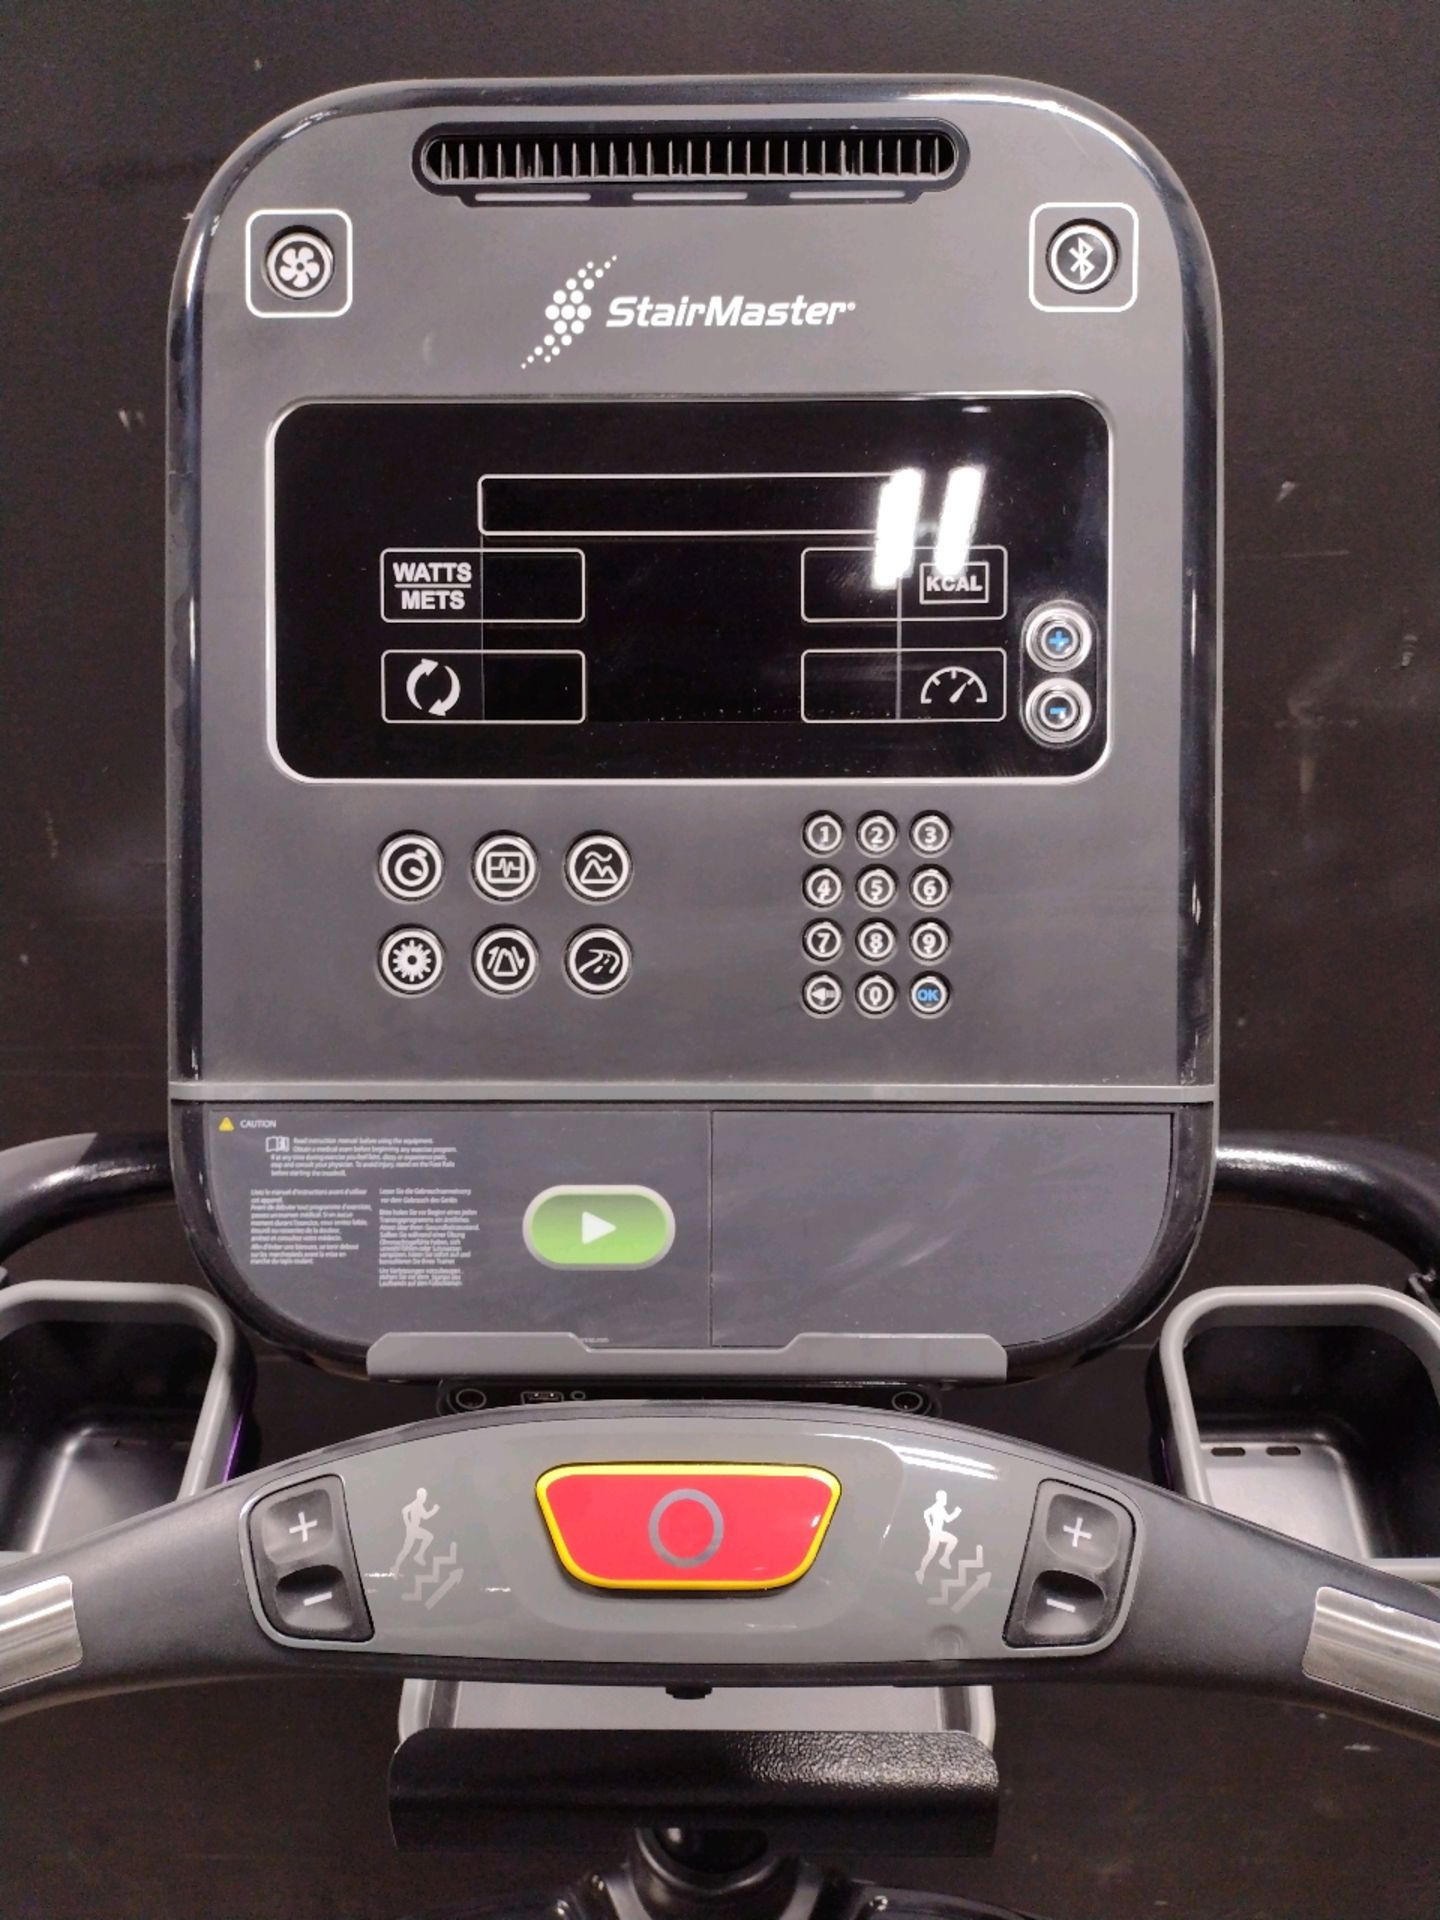 STAIRMASTER STEPMILL (LOCATED AT 3325 MOUNT PROSPECT ROAD, FRANKLIN PARK, IL, 60131) - Image 2 of 3